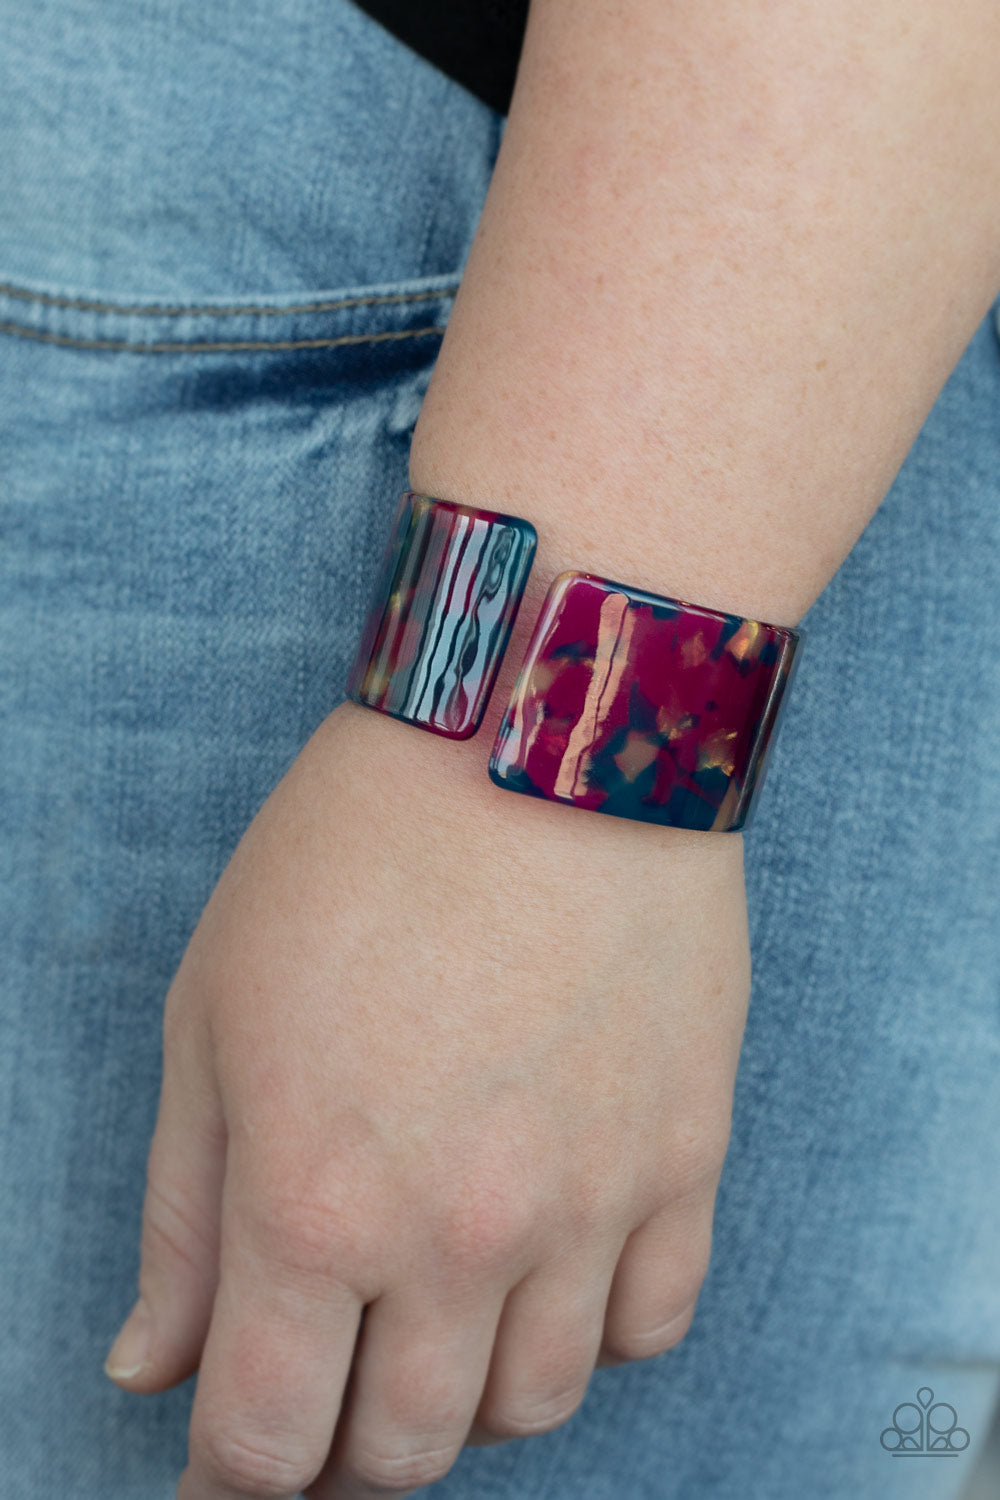 GROOVY VIBES - MULTI PURPLE AND BLUE ABSTRACT ACRYLIC CUFF BRACELET